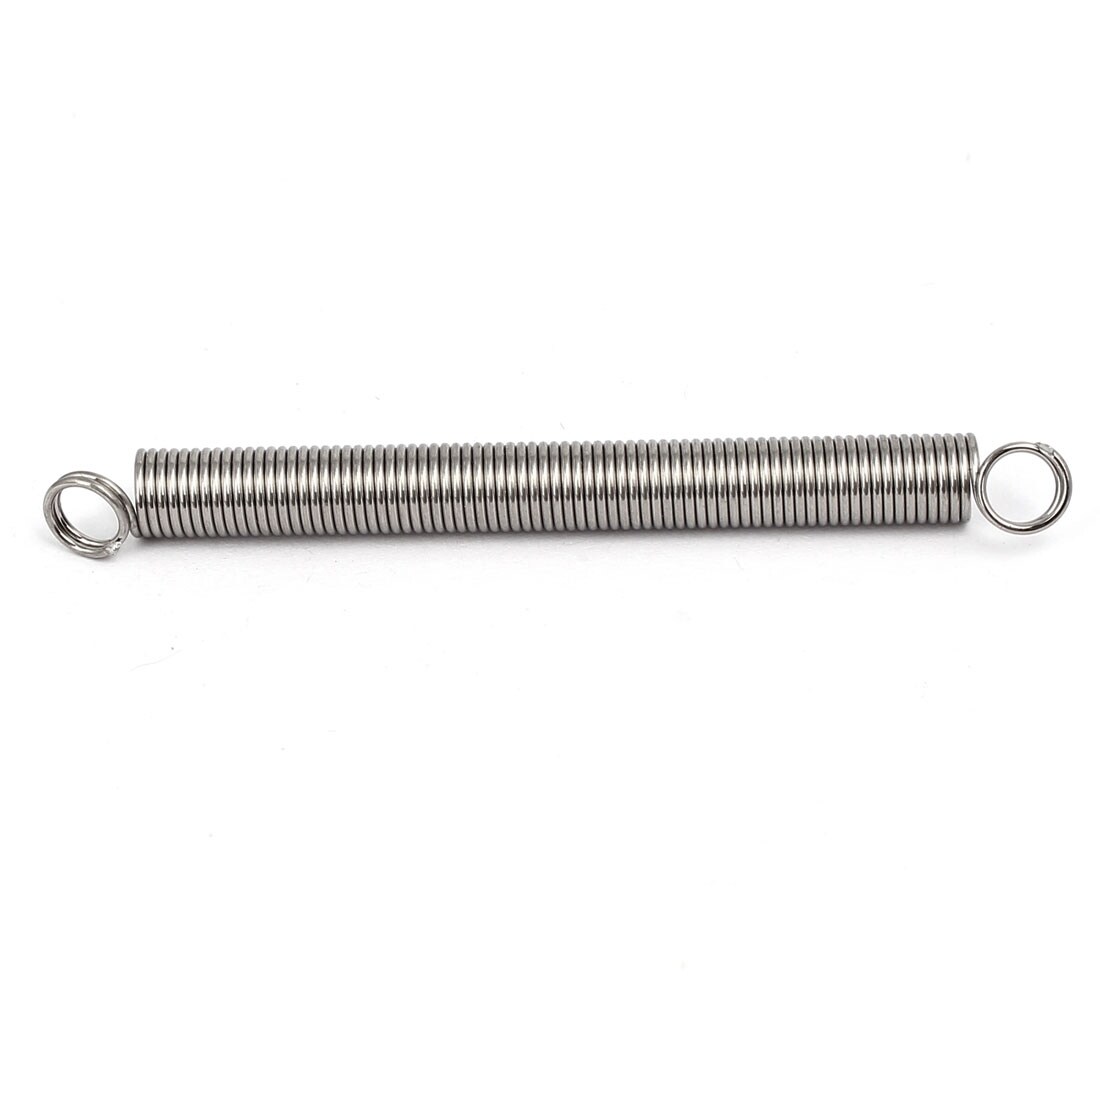 0.6mmx5mmx55mm 304 Stainless Steel Tension Springs Silver Tone 10pcs 